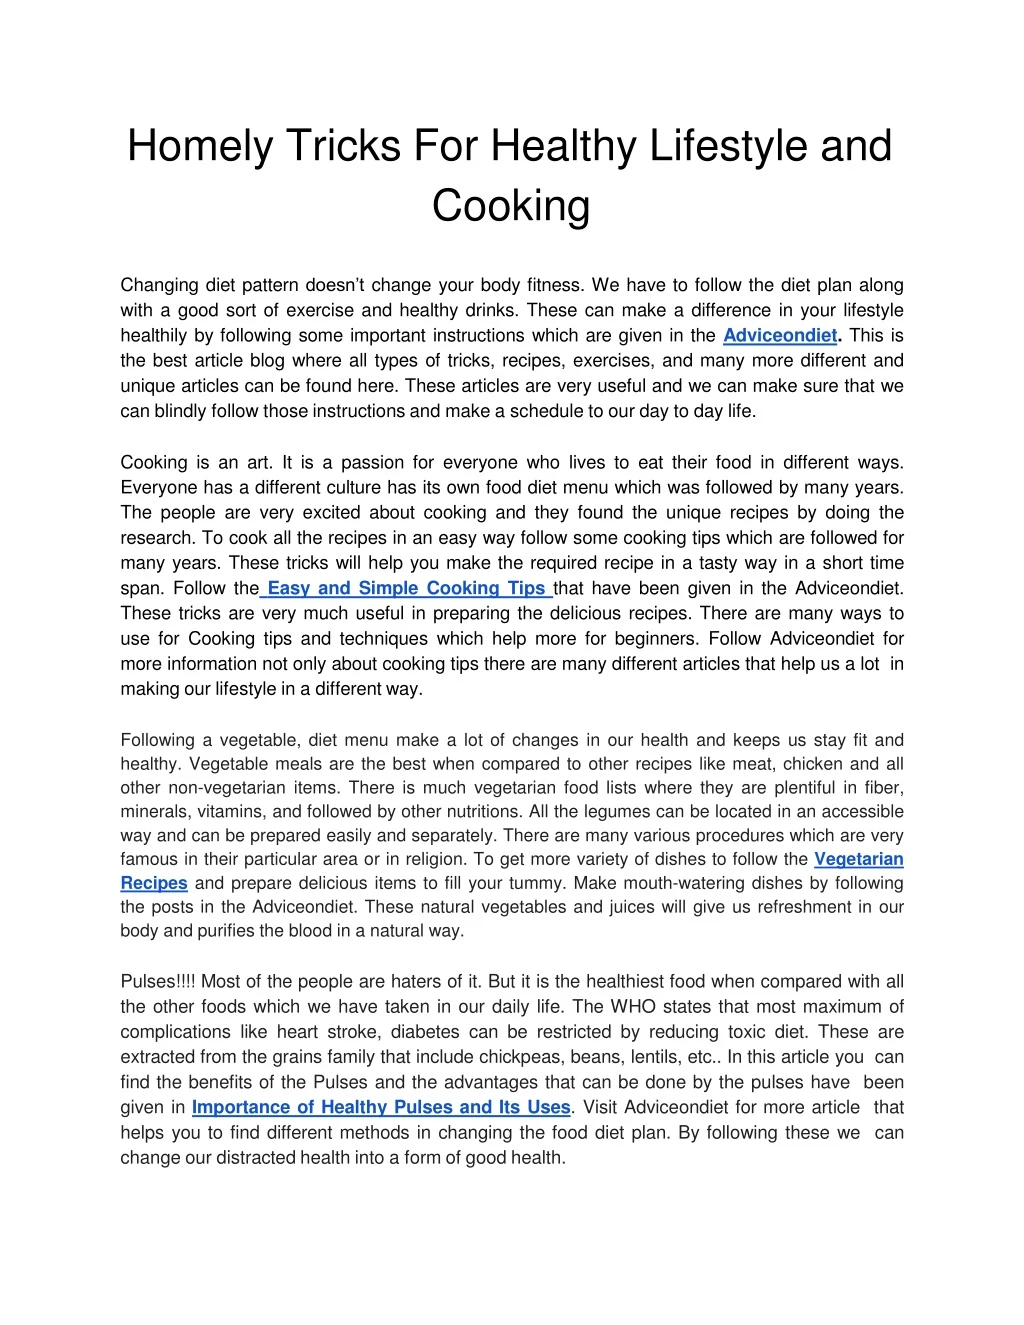 homely tricks for healthy lifestyle and cooking